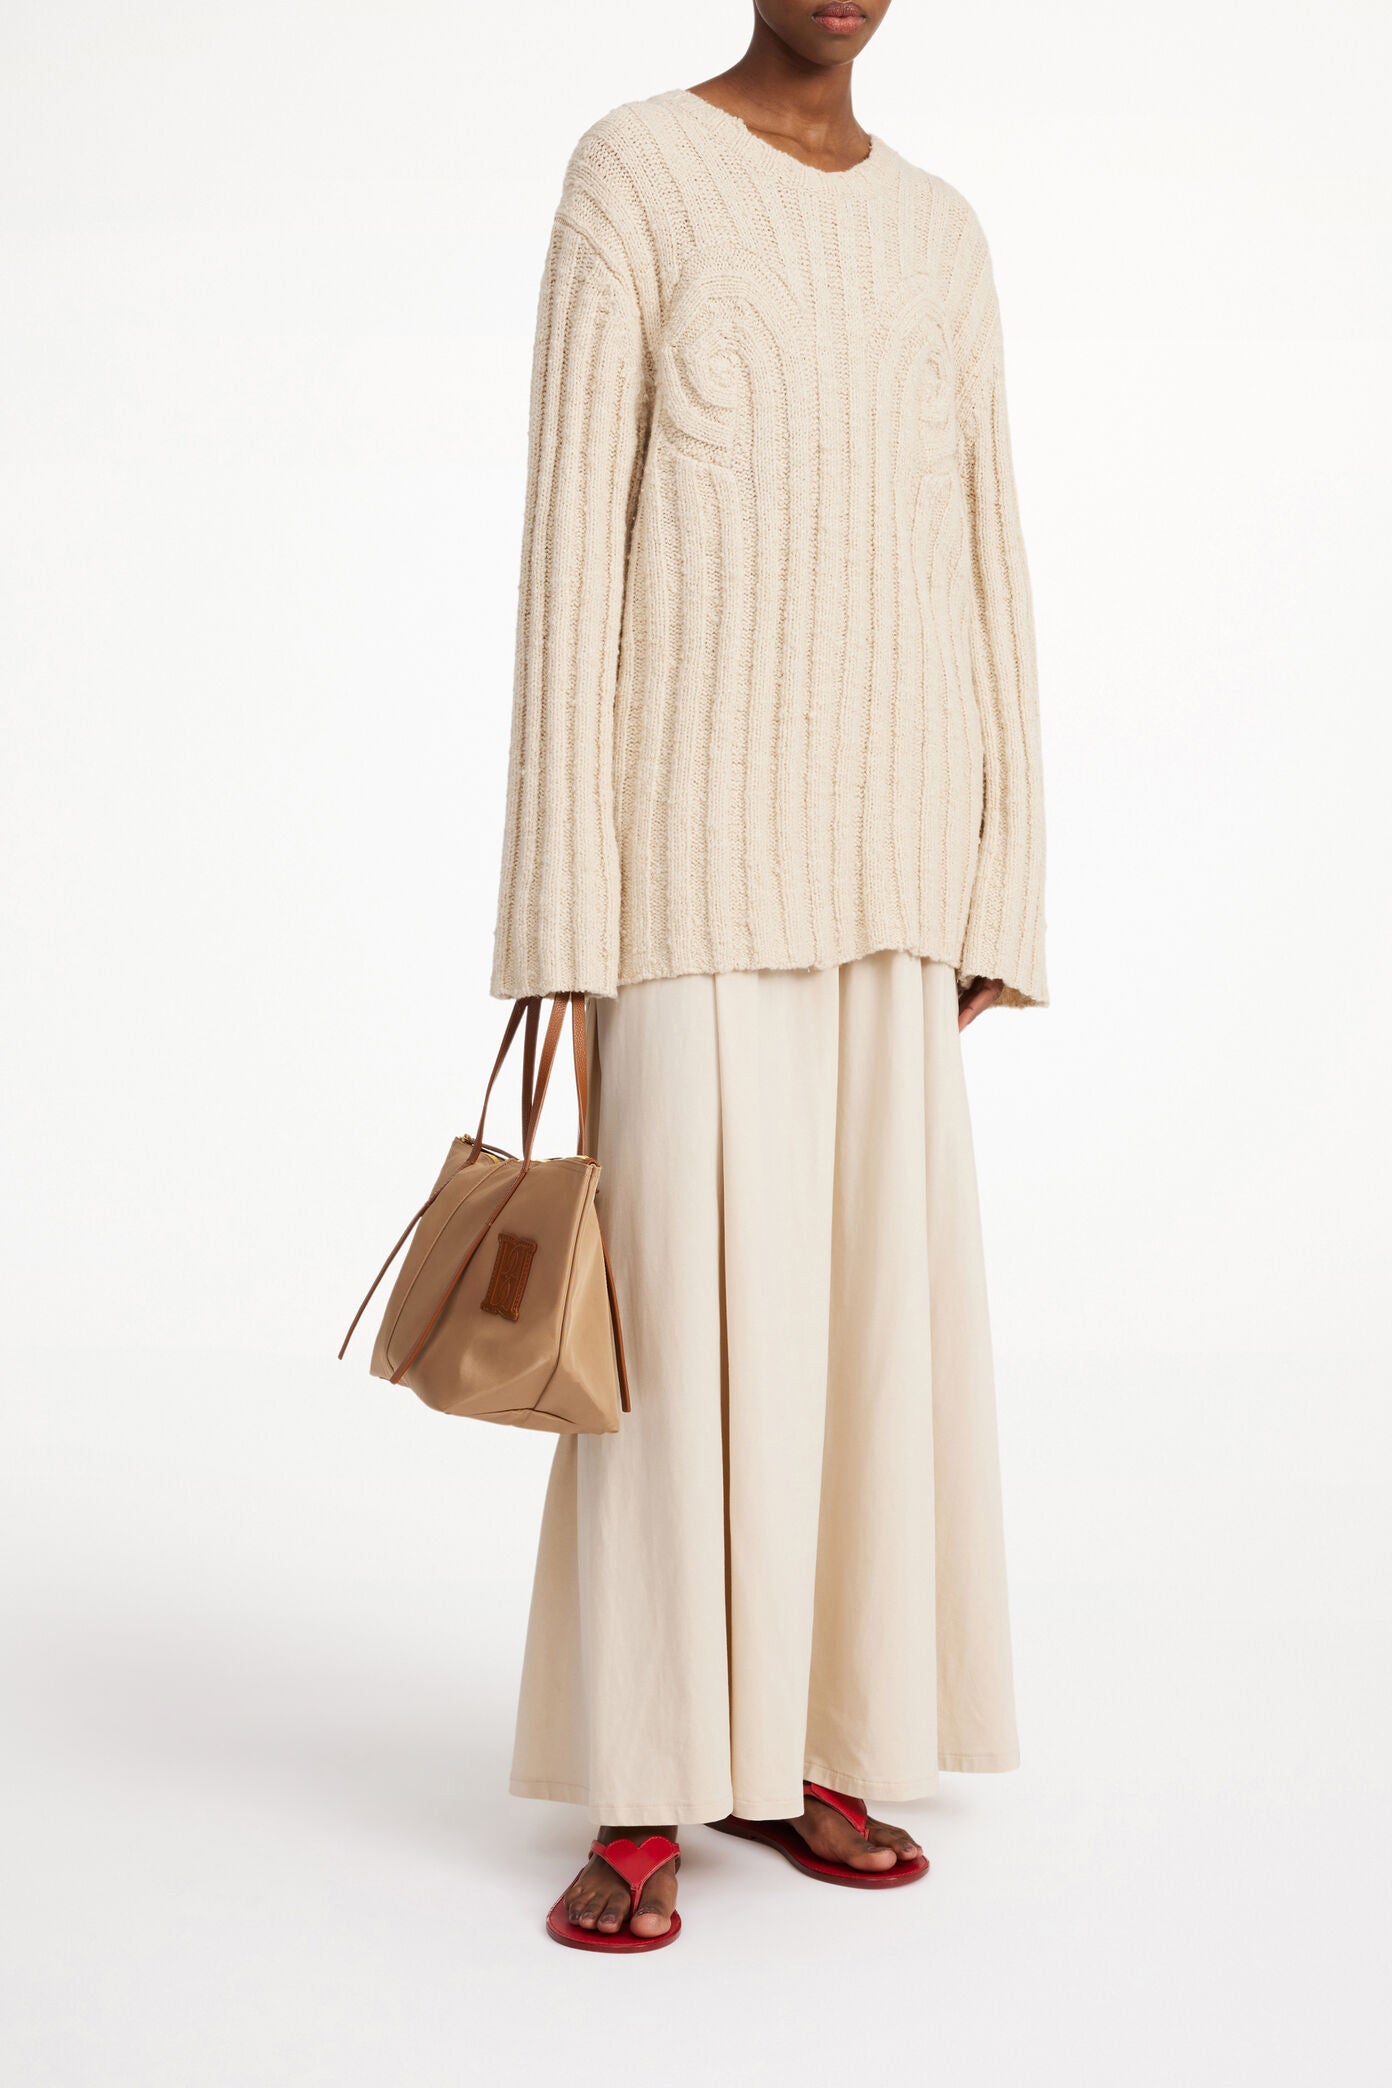 Pullover Cirra in Oyster Greyby Malene Birger - Anita Hass